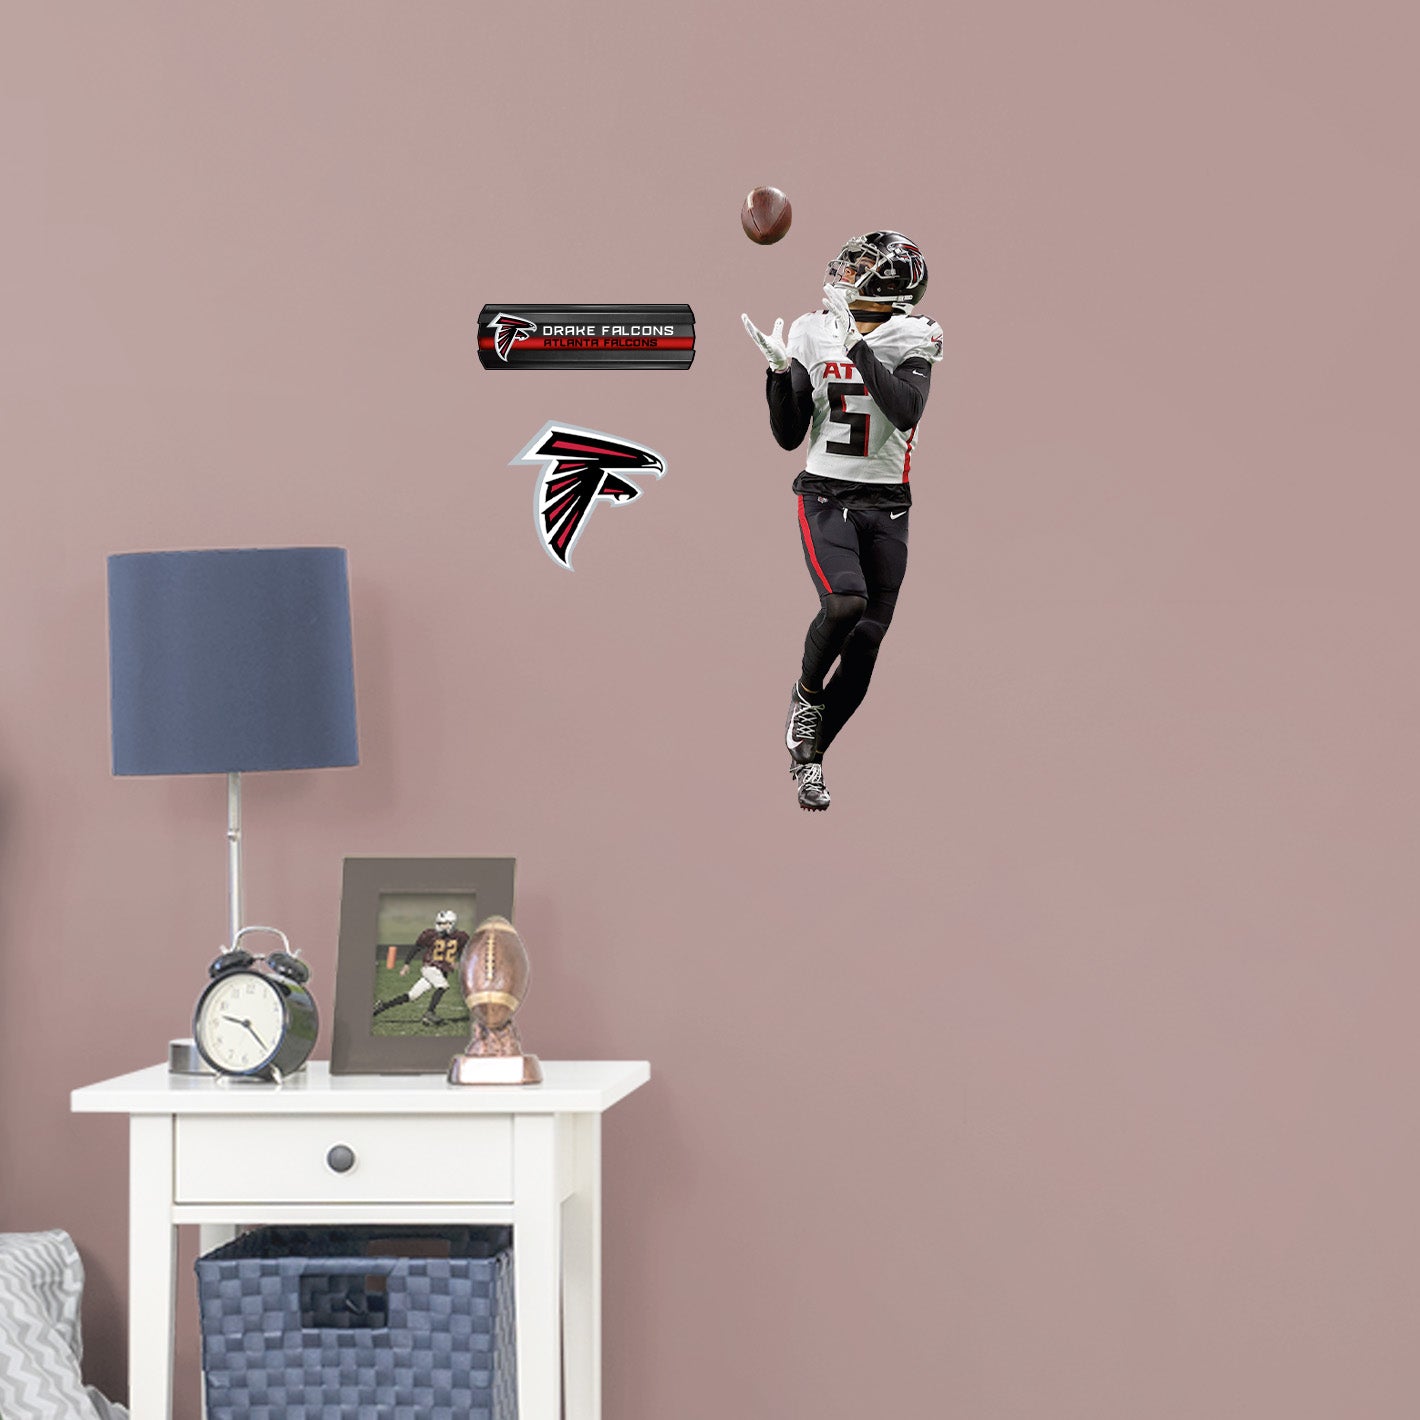 Atlanta Falcons: Drake London         - Officially Licensed NFL Removable     Adhesive Decal